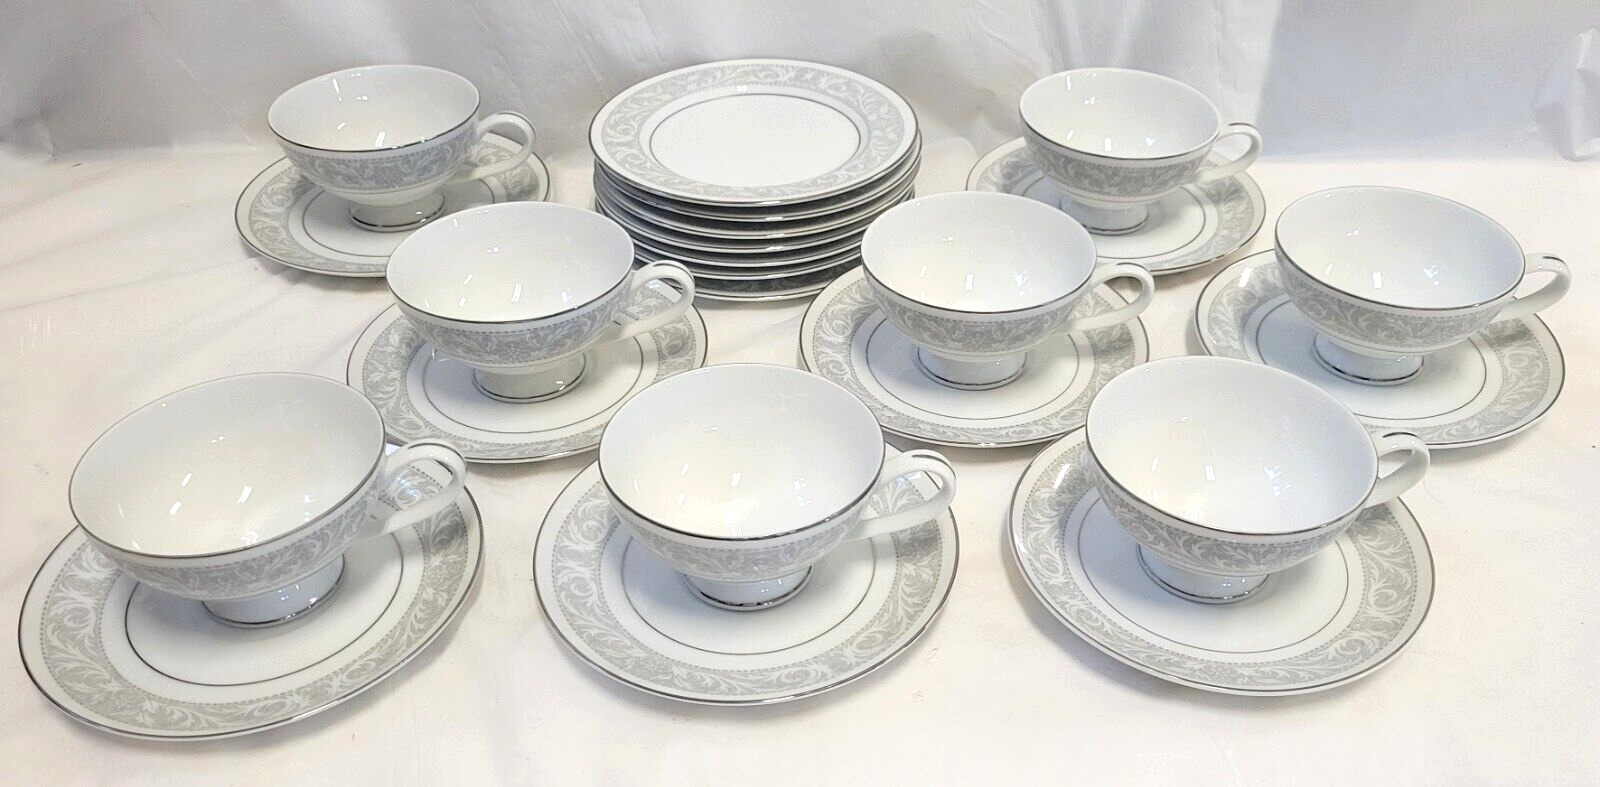 Vintage Imperial China Set 5671 by W Dalton / 8 CUPS, 8 SAUCERS, 7 BREAD PLATES